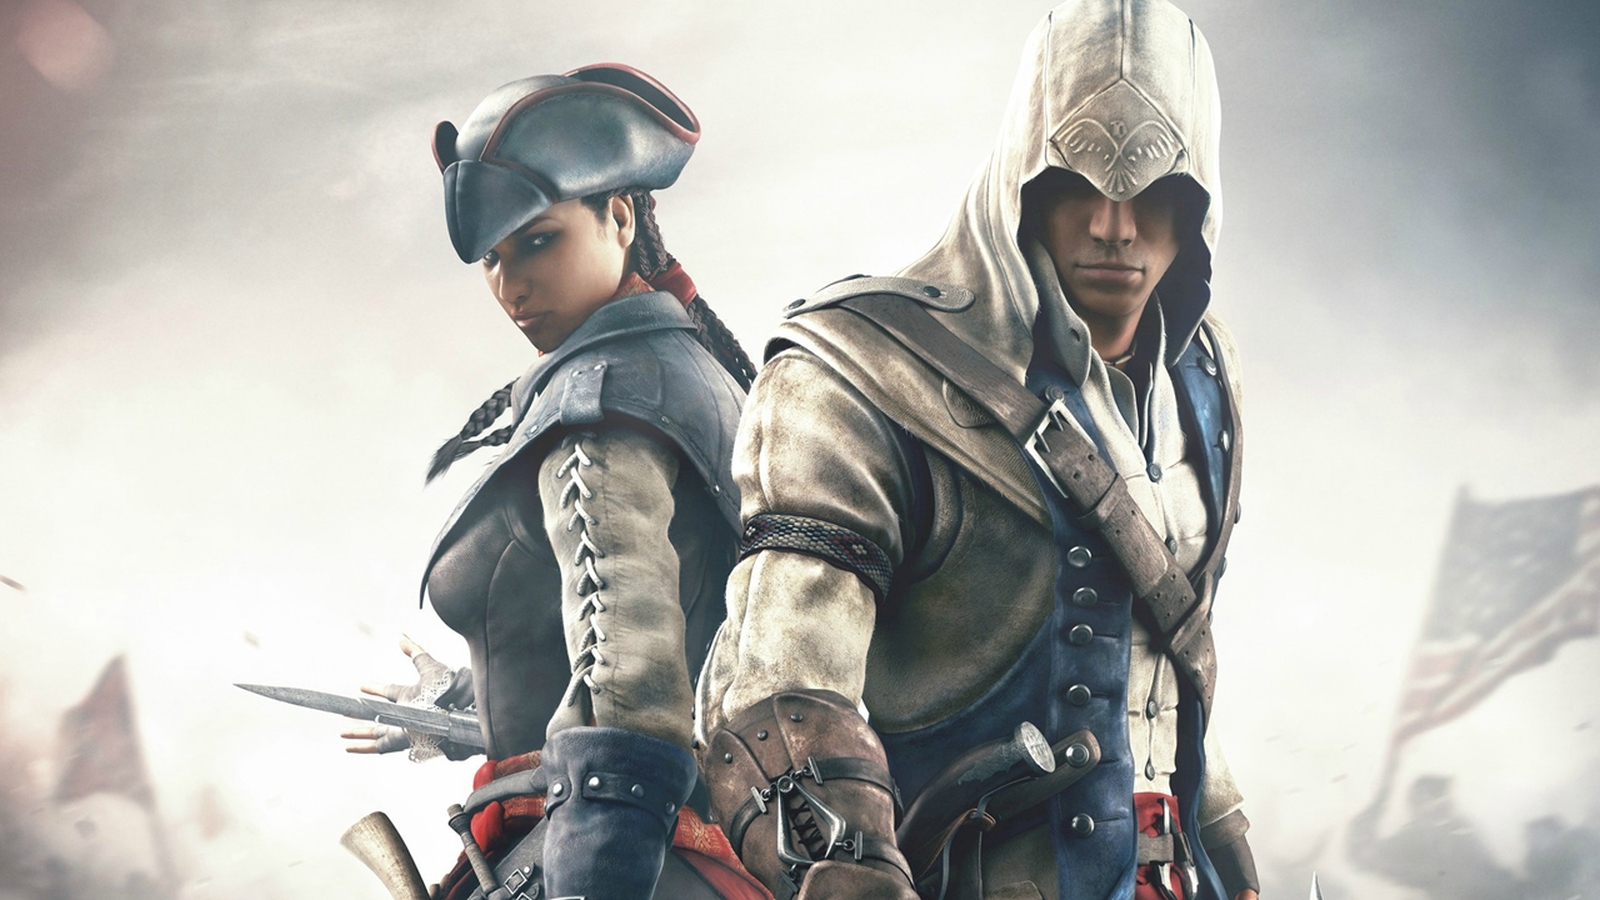 Assassin's Creed III / Liberation Remastered impressions